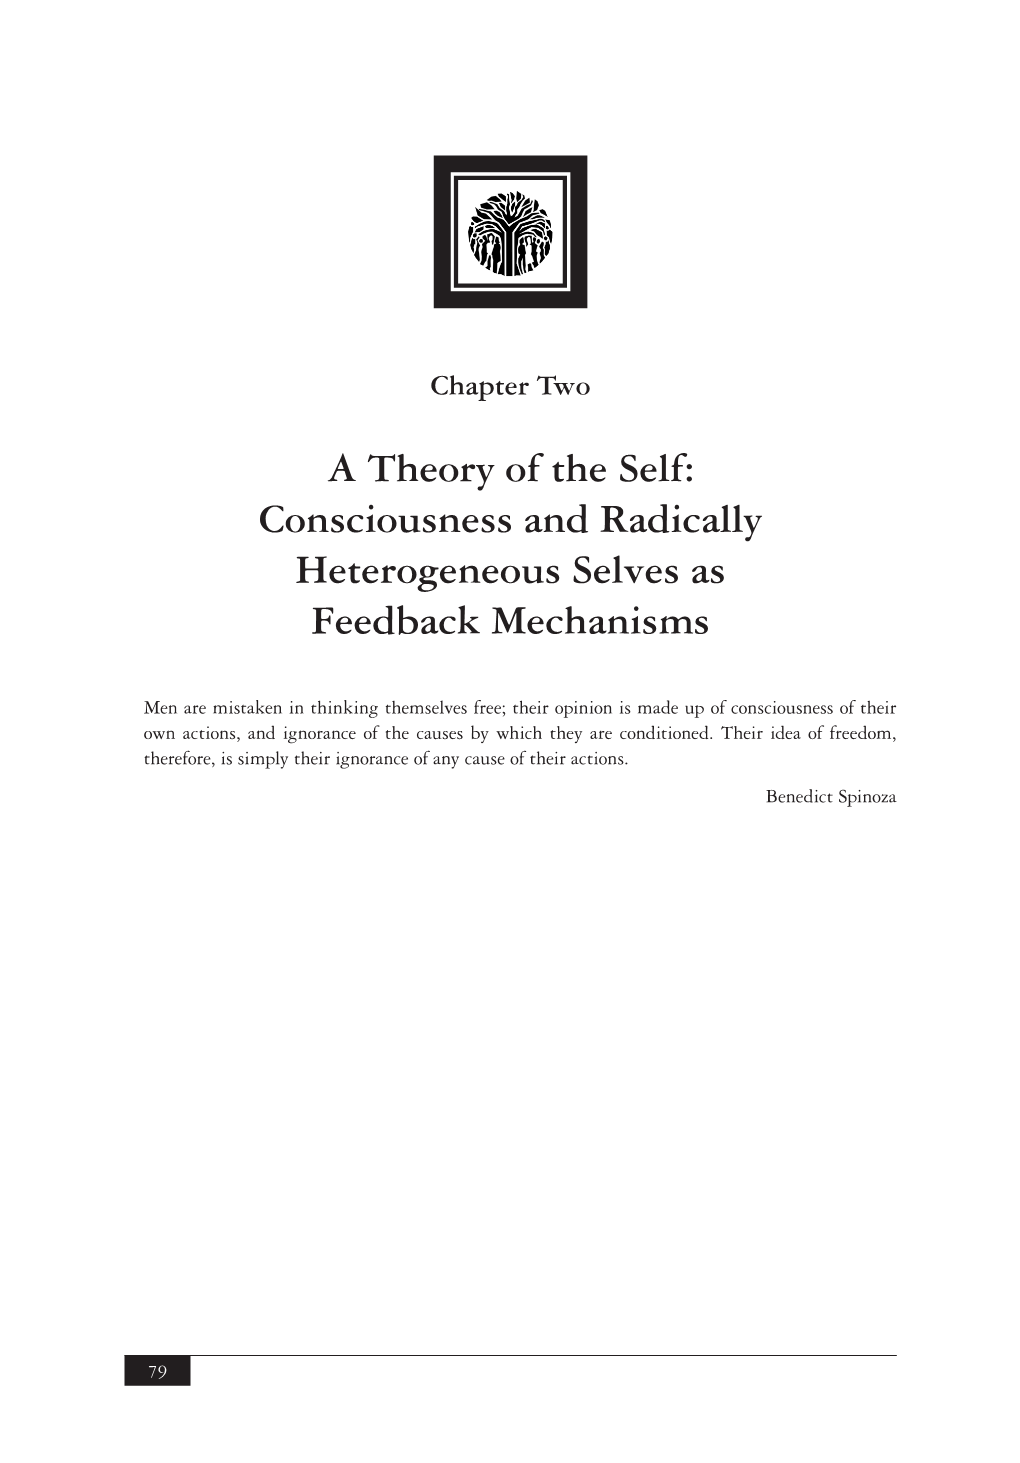 A Theory of the Self: Consciousness and Radically Heterogeneous Selves As Feedback Mechanisms